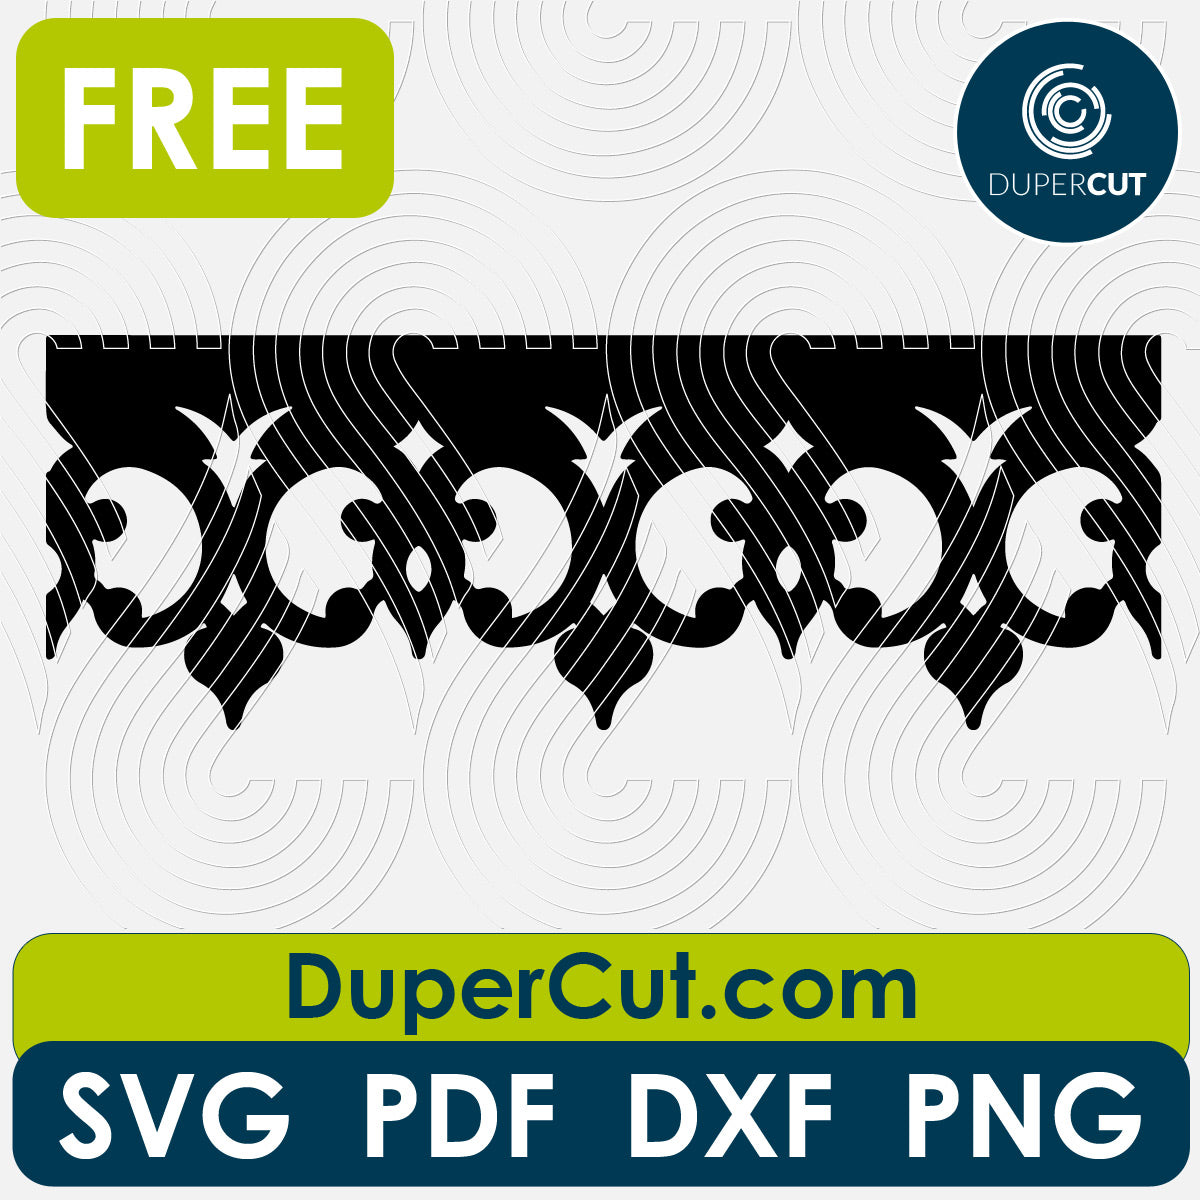 Vintage Border pattern, FREE cutting template SVG PNG DXF files for Glowforge, Cricut, Silhouette, CNC laser router by DuperCut.com